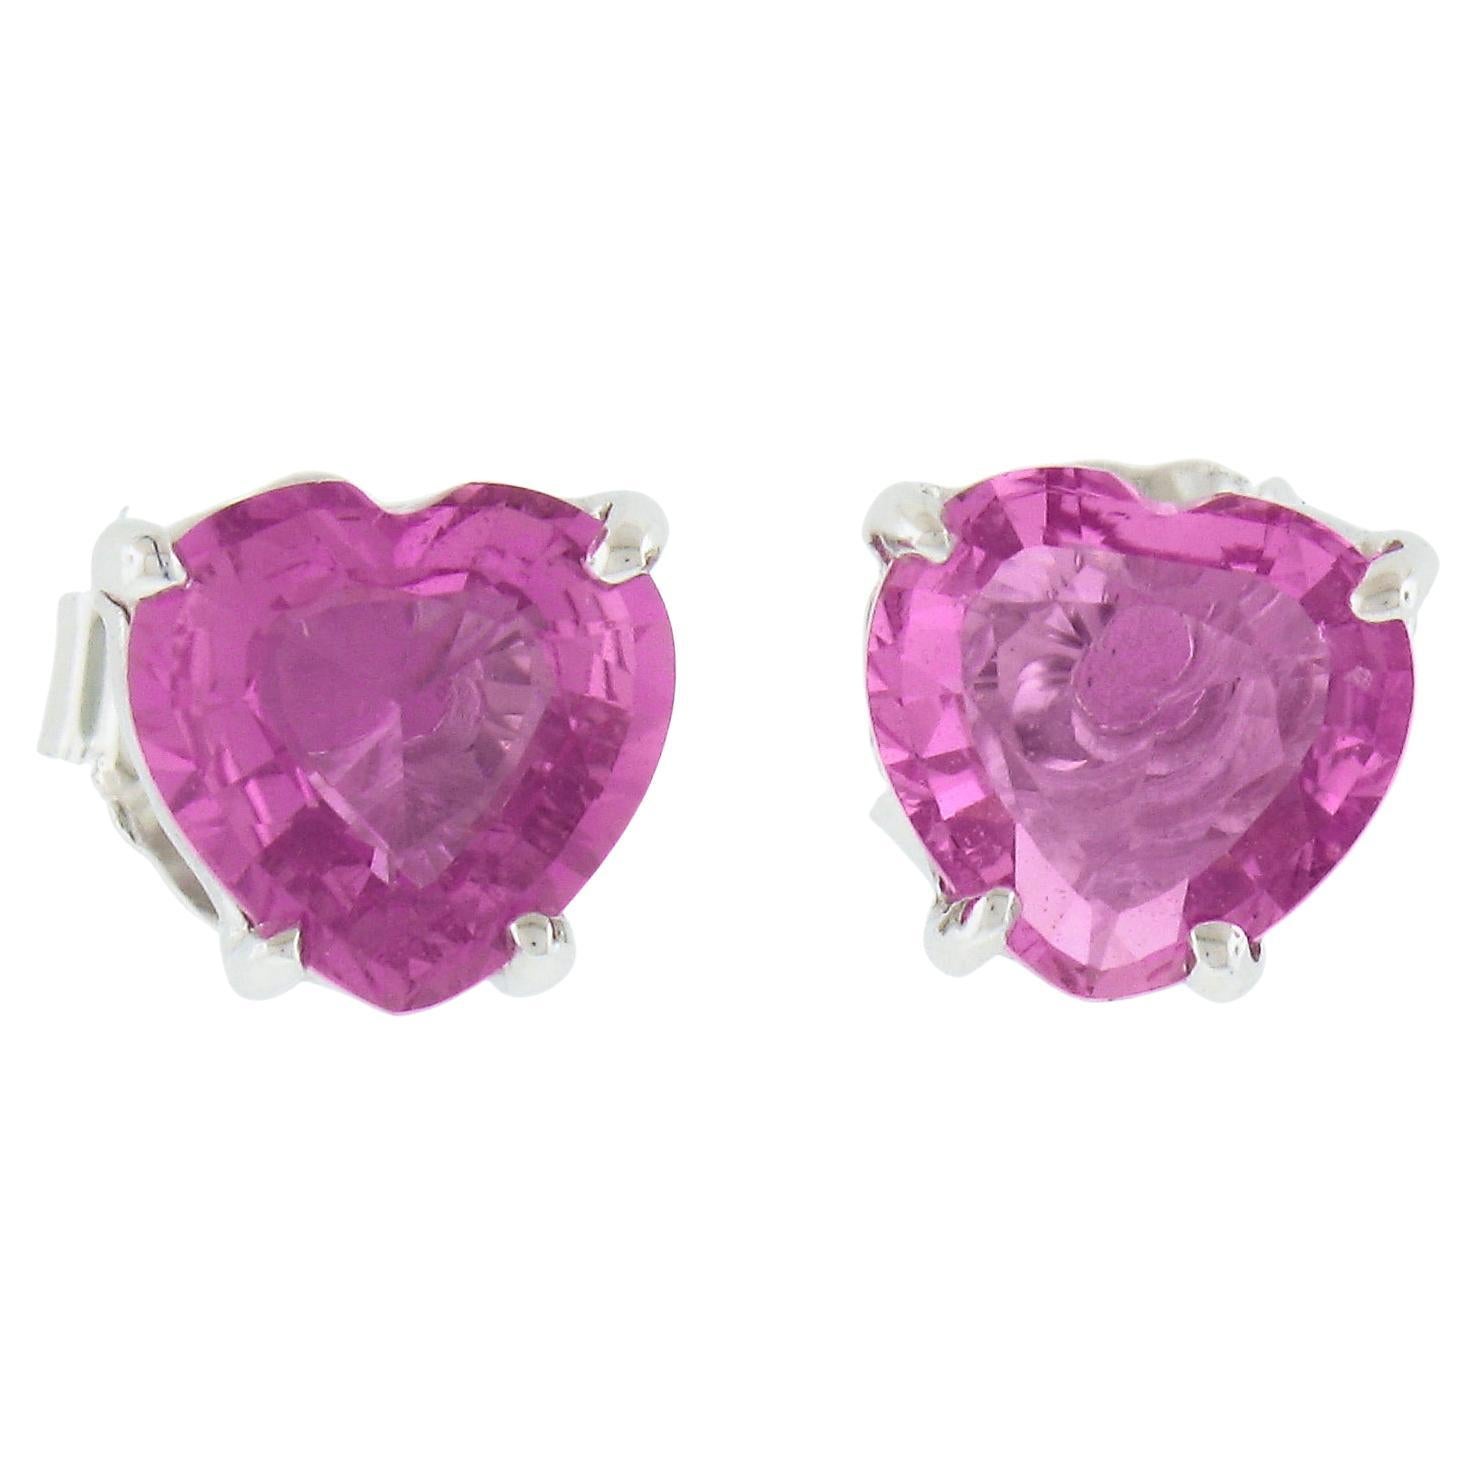 New 14K White Gold 1.44ctw Heart Prong Set Pink Sapphire Solitaire Stud Earrings For Sale